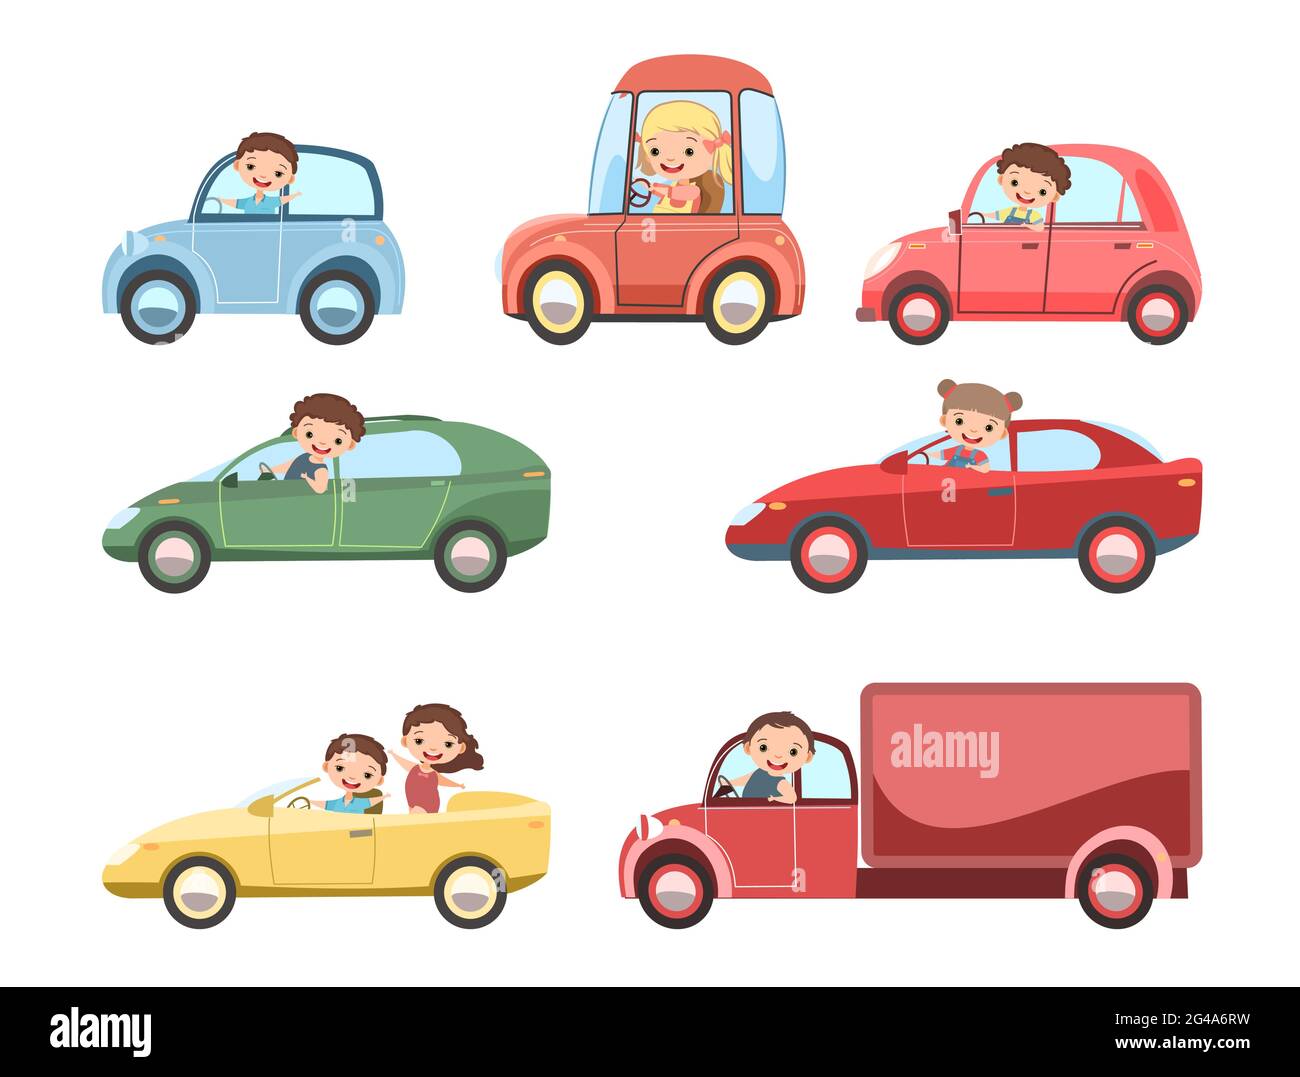 Childrens car. Set. Kids drives different cars and truck. Toy avehicle. With a motor. Nice passenger auto. Isolated over white background. Vector Stock Vector